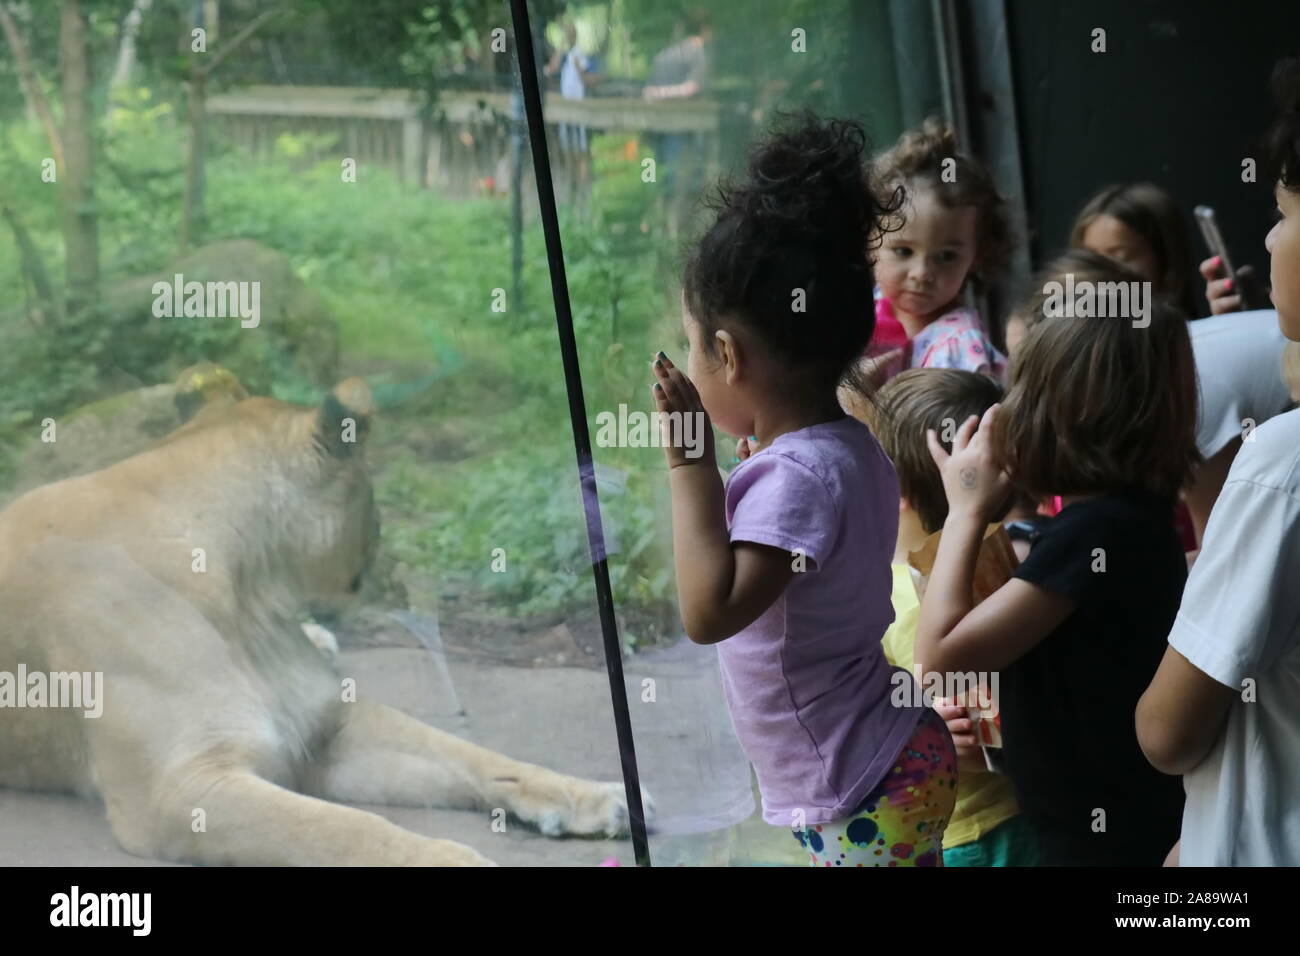 Madison, WI / USA - August 5, 2018: Curious little black girl leans against the glass separating her and a lioness in its enclosure Stock Photo